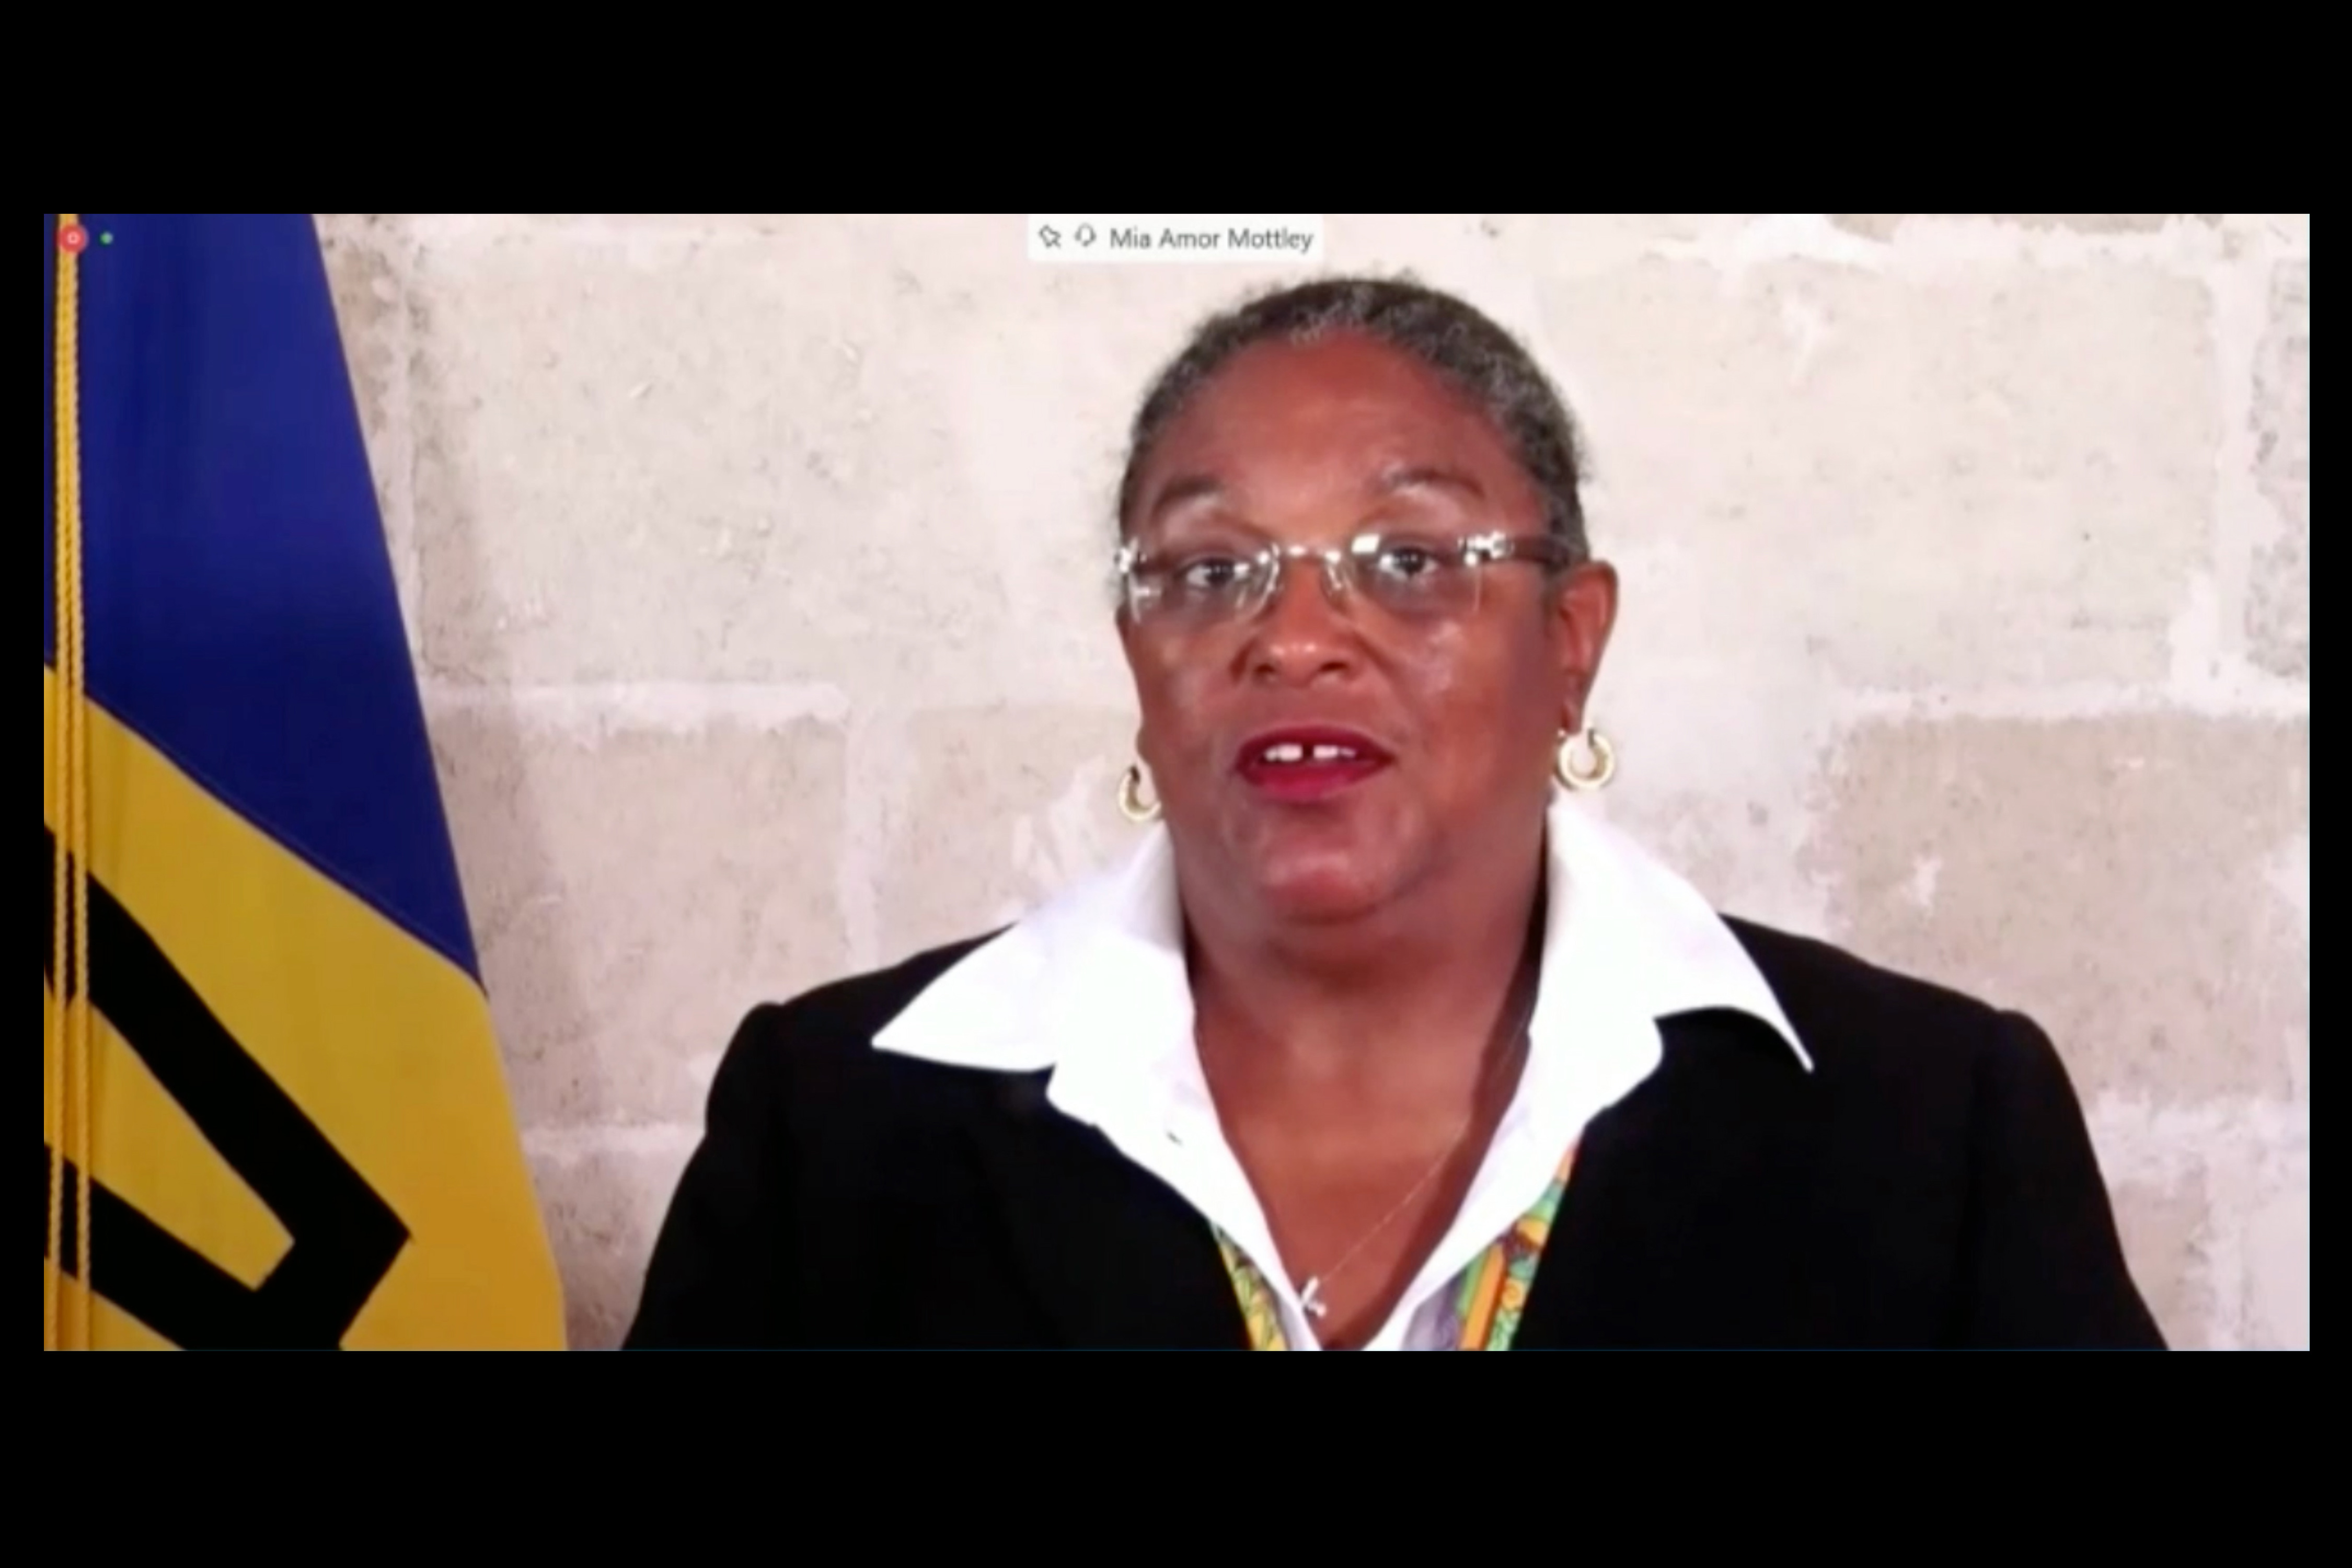 Mia Amor Mottley, Prime Minister, Minister for National Security and the Civil Service, and Minister for Finance, Economic Affairs and Investment, Barbados